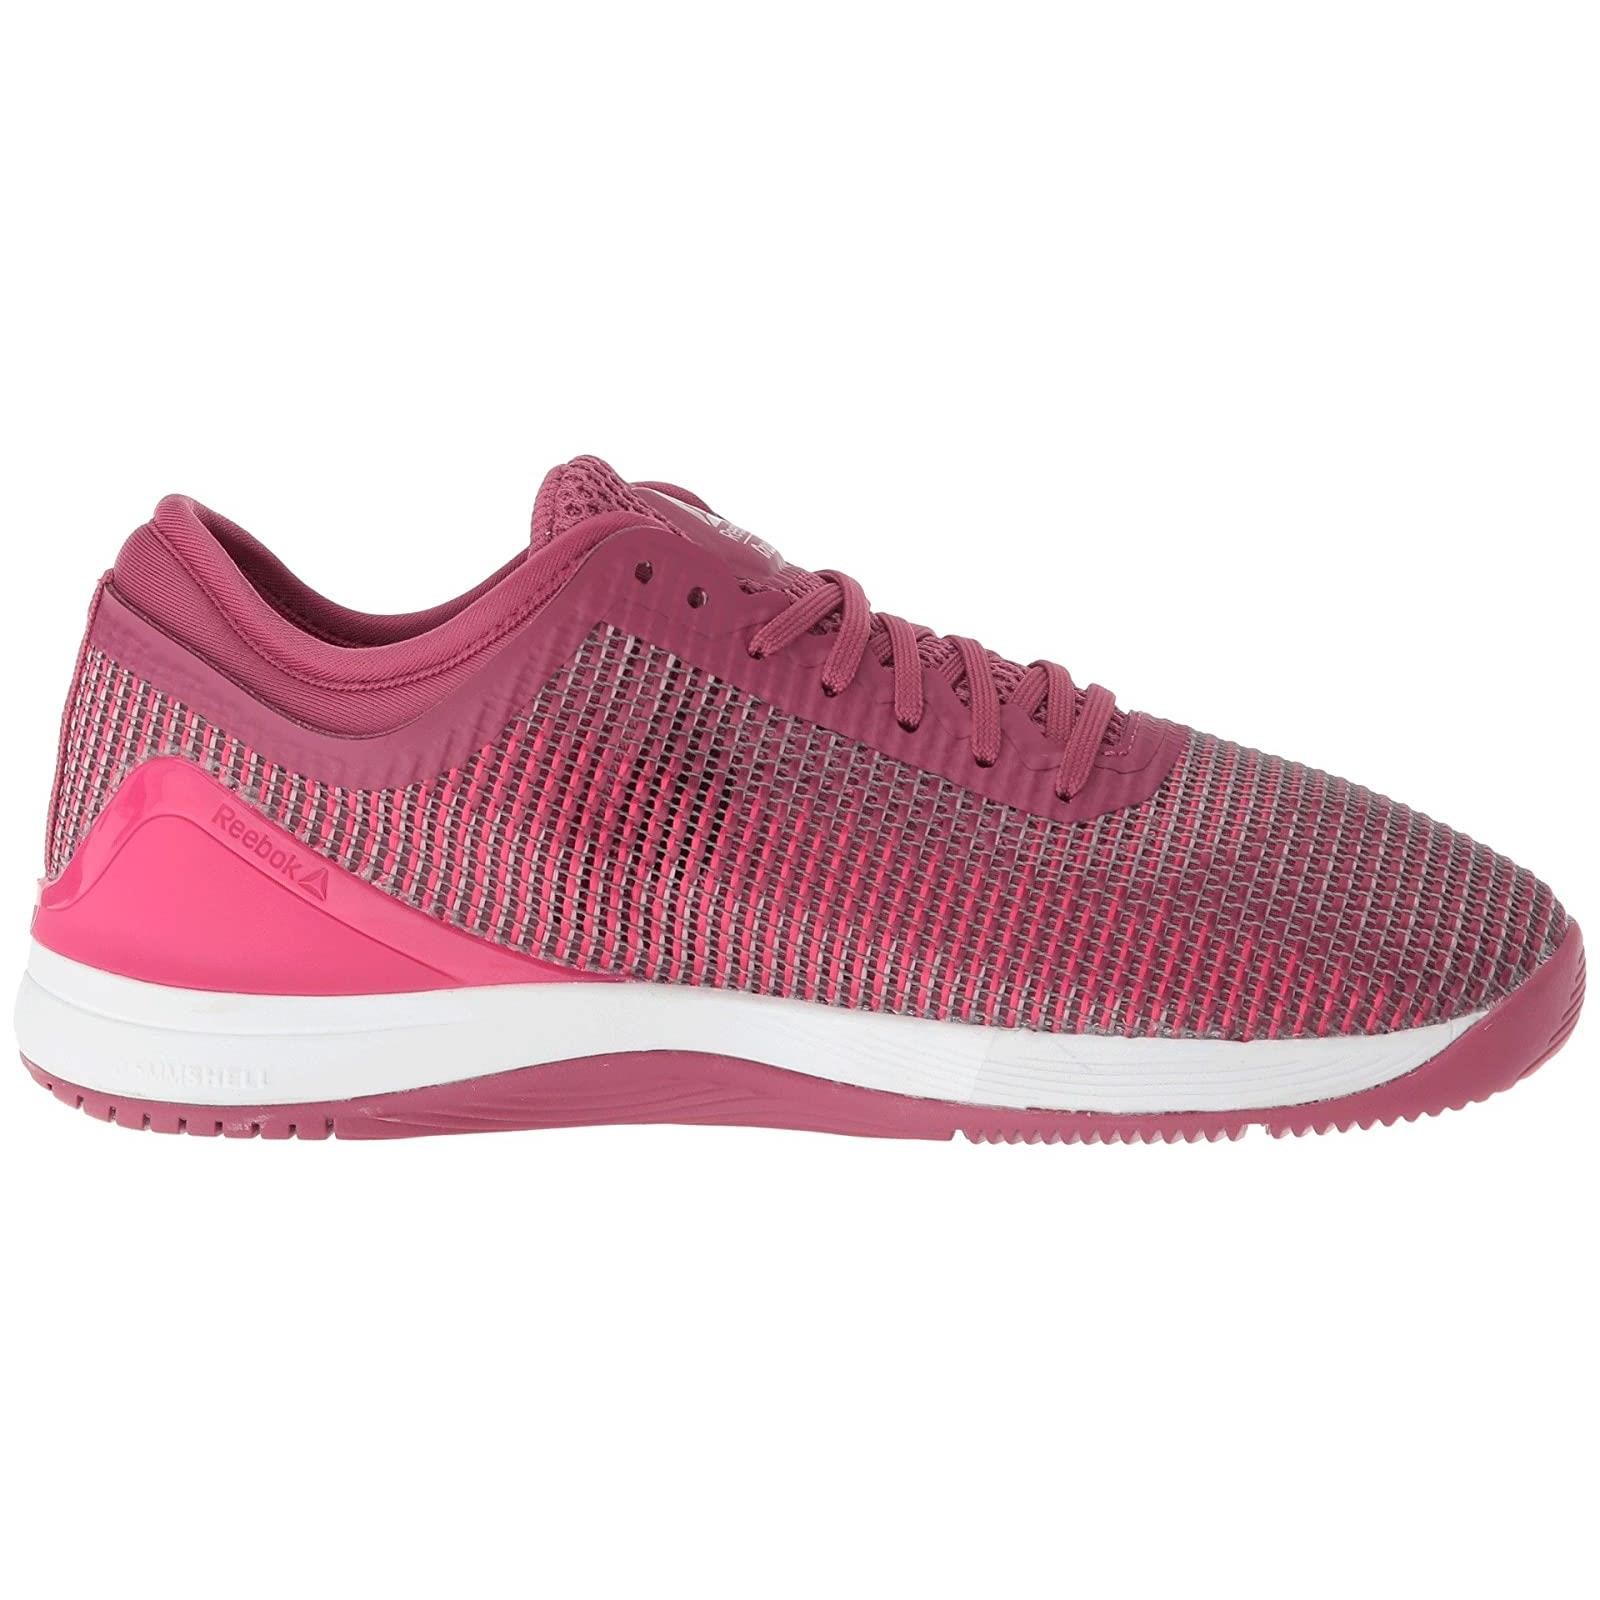 Womens Reebok Crossfit Nano 8.0 TWISTED BERRY/TWISTED PINK/WHT/INFUSED LILAC 